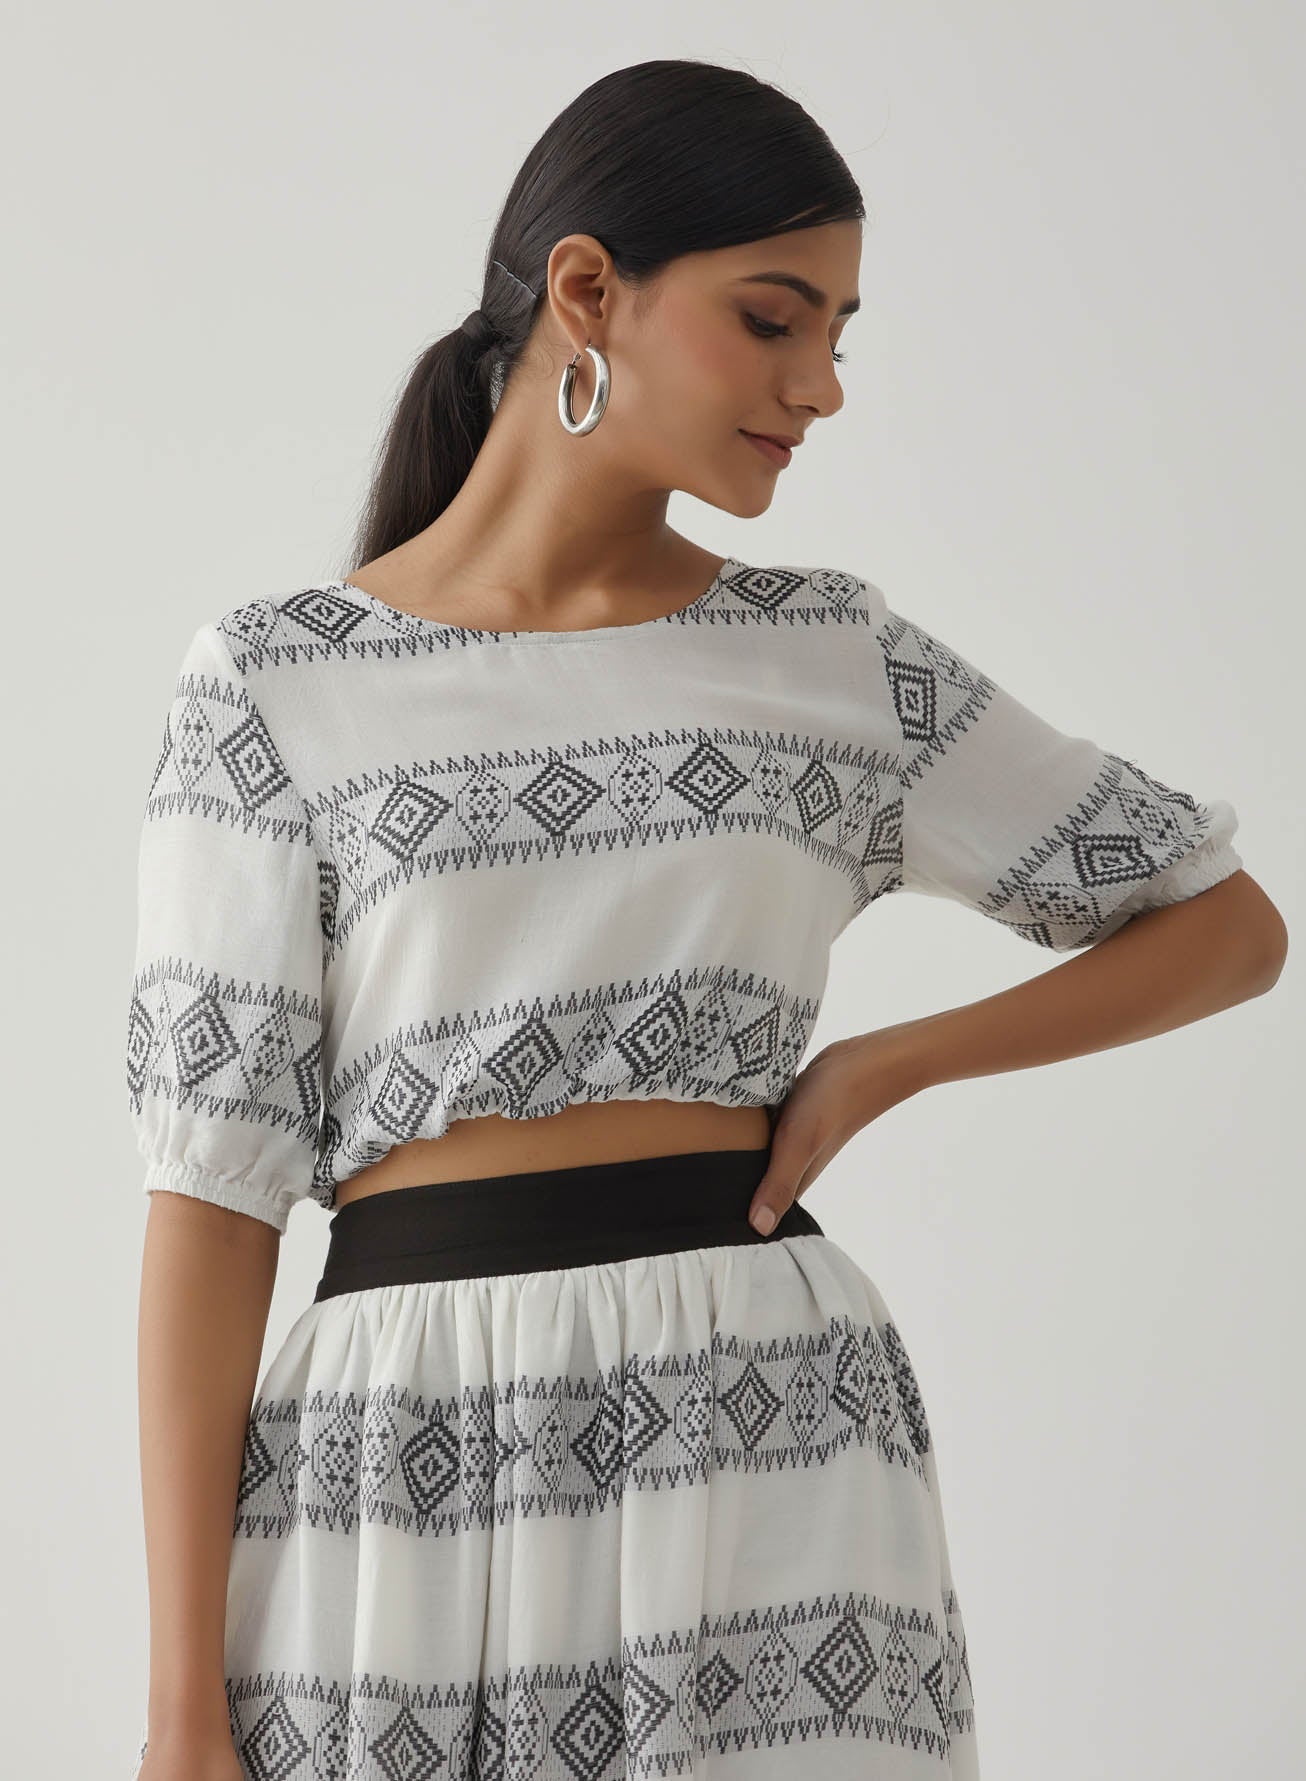 White/Black Crop Top Skirt Set - The Indian Cause